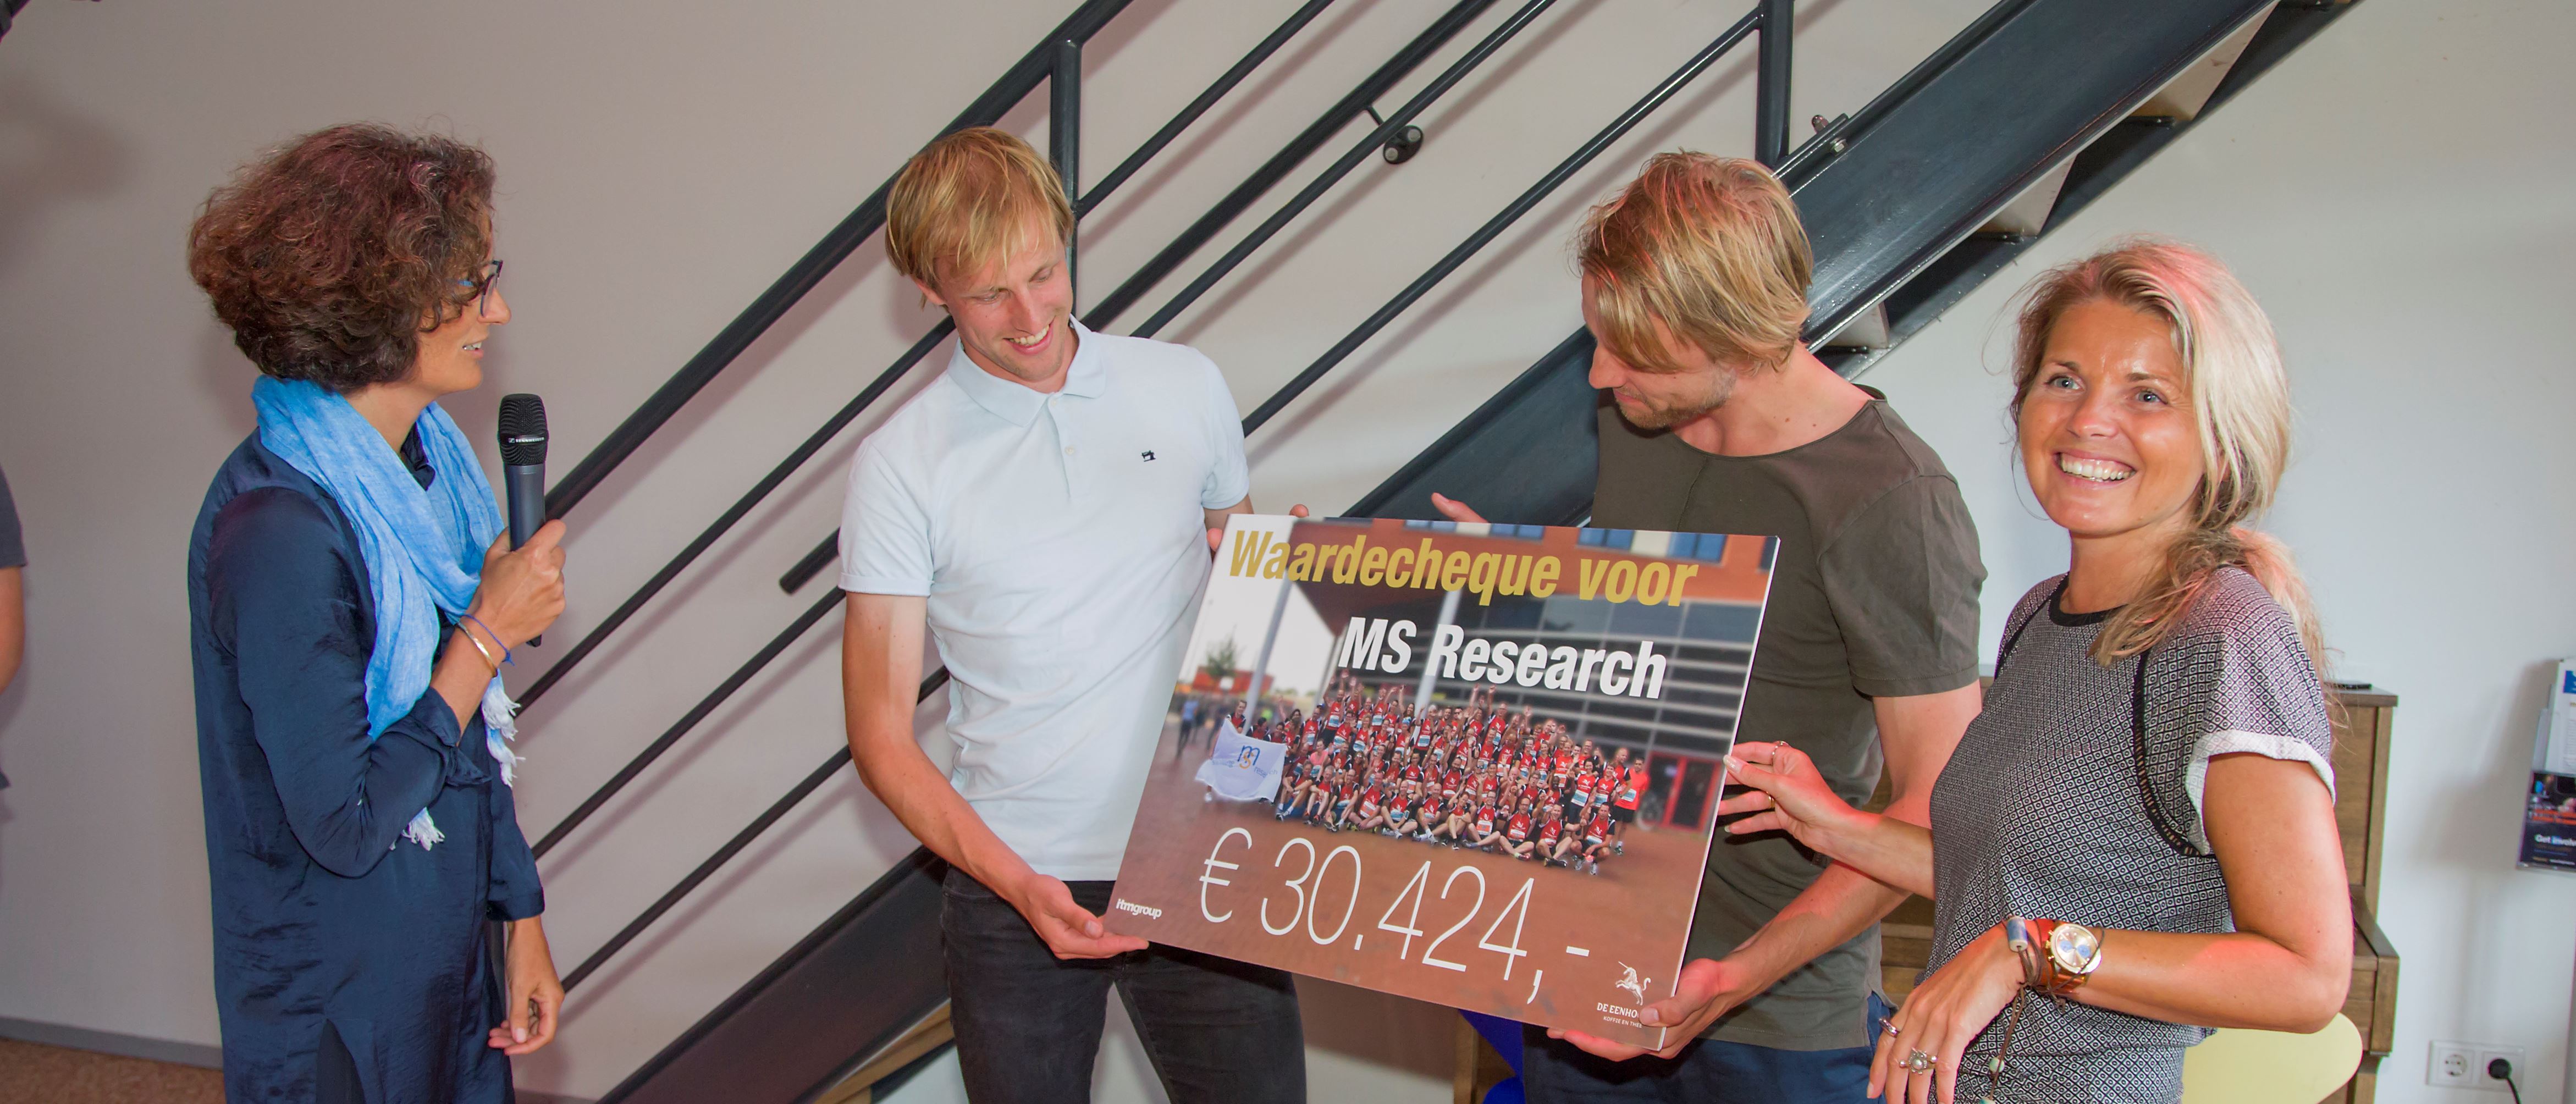 ITMGroup donates over 30.000 euros to MS Research